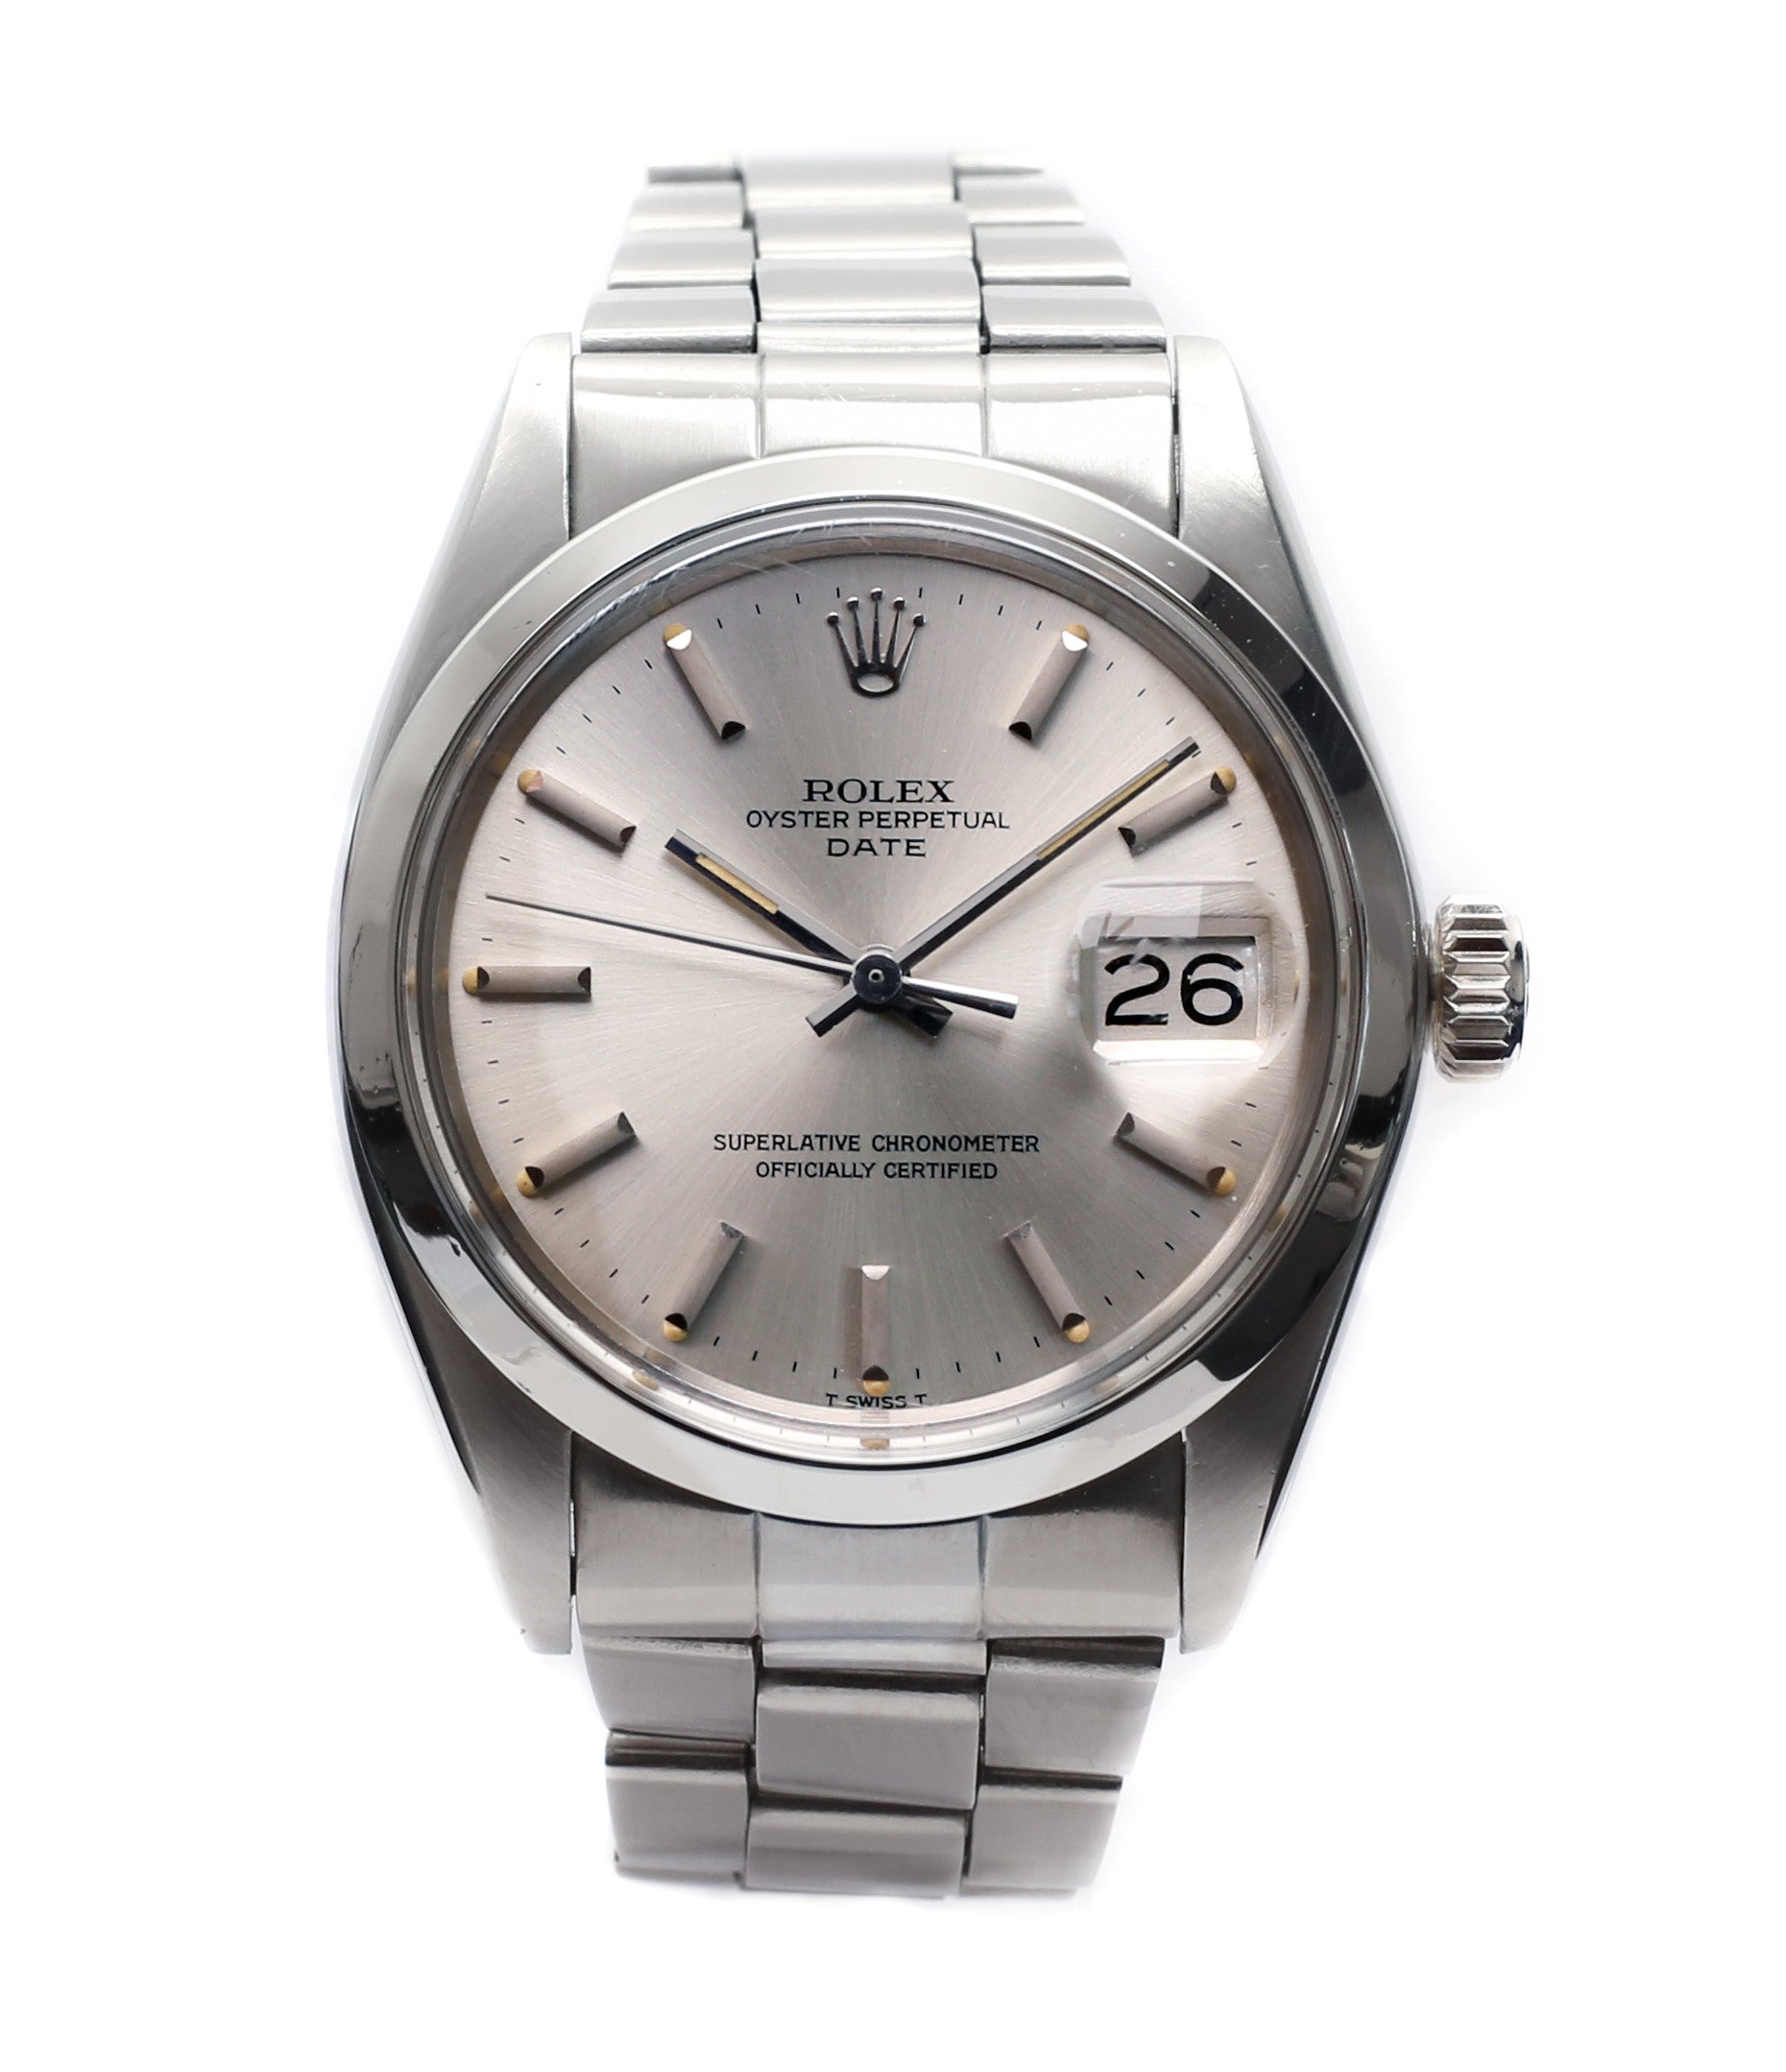 Buy Rolex Perpetual Date 1500 watch | Buy vintage A COLLECTED MAN